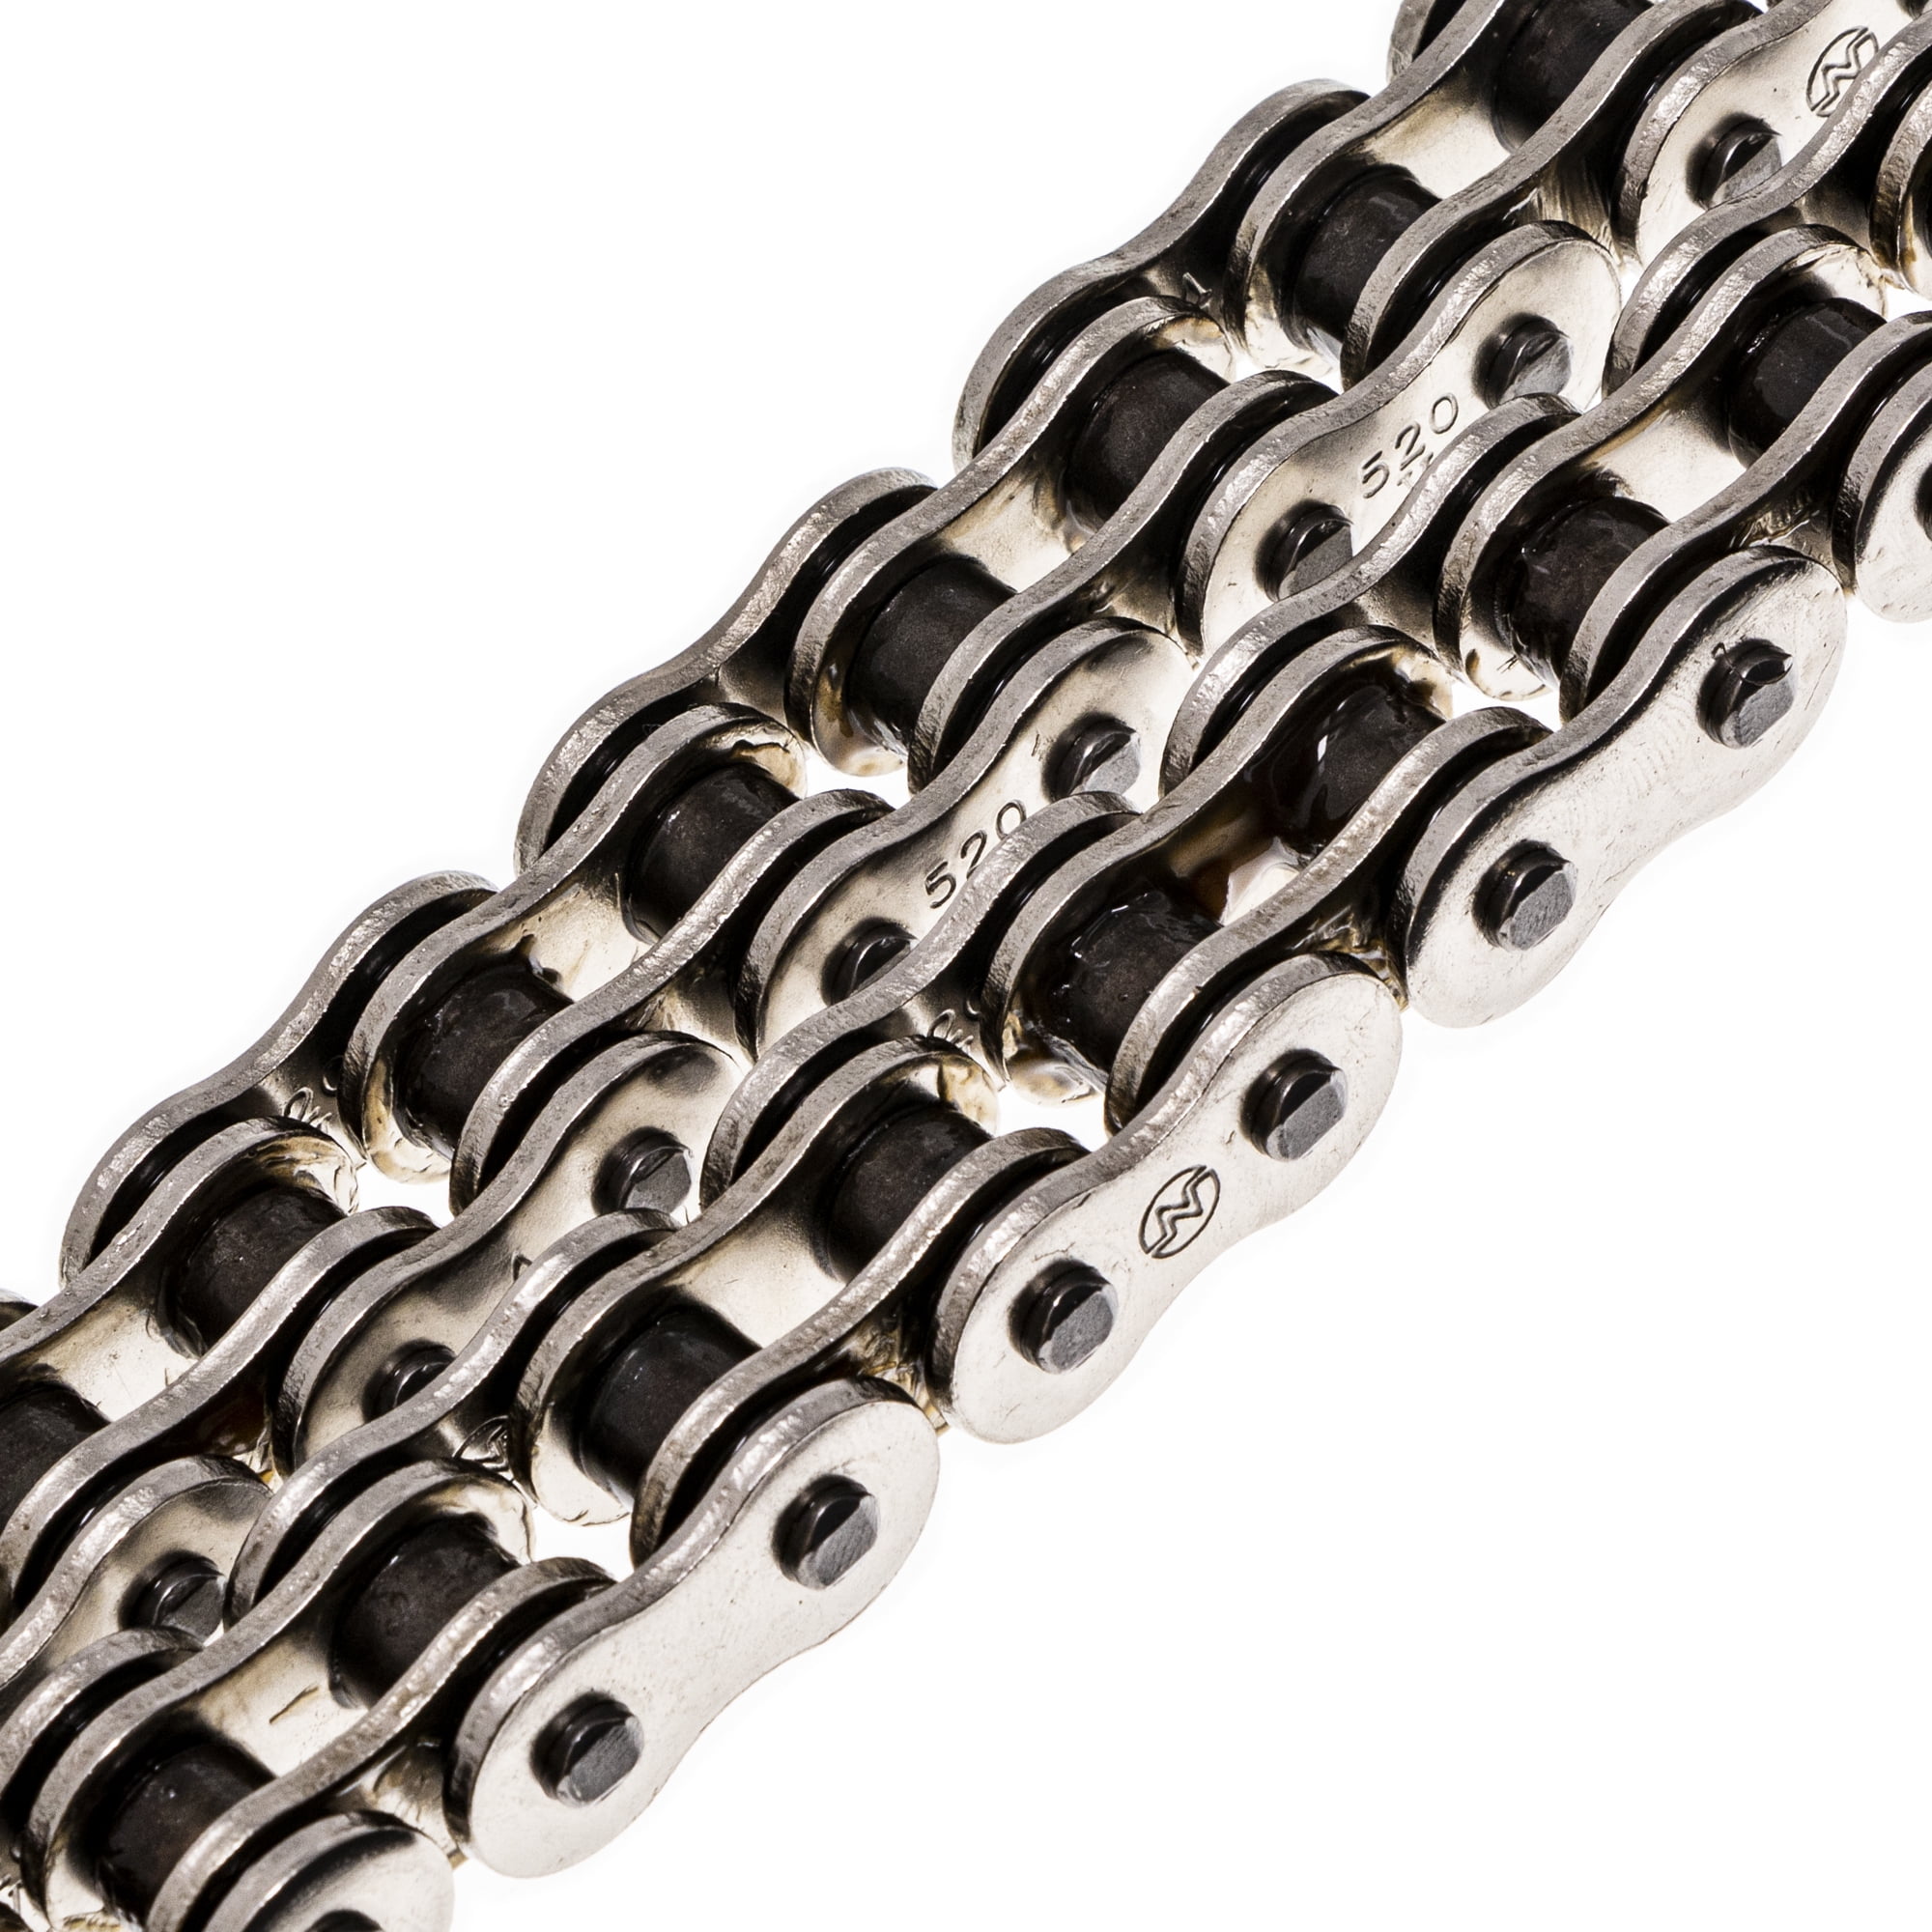 Niche 520 Drive Chain 92 Links Non O-Ring with Master Link Motorcycle  519-CDC2238H